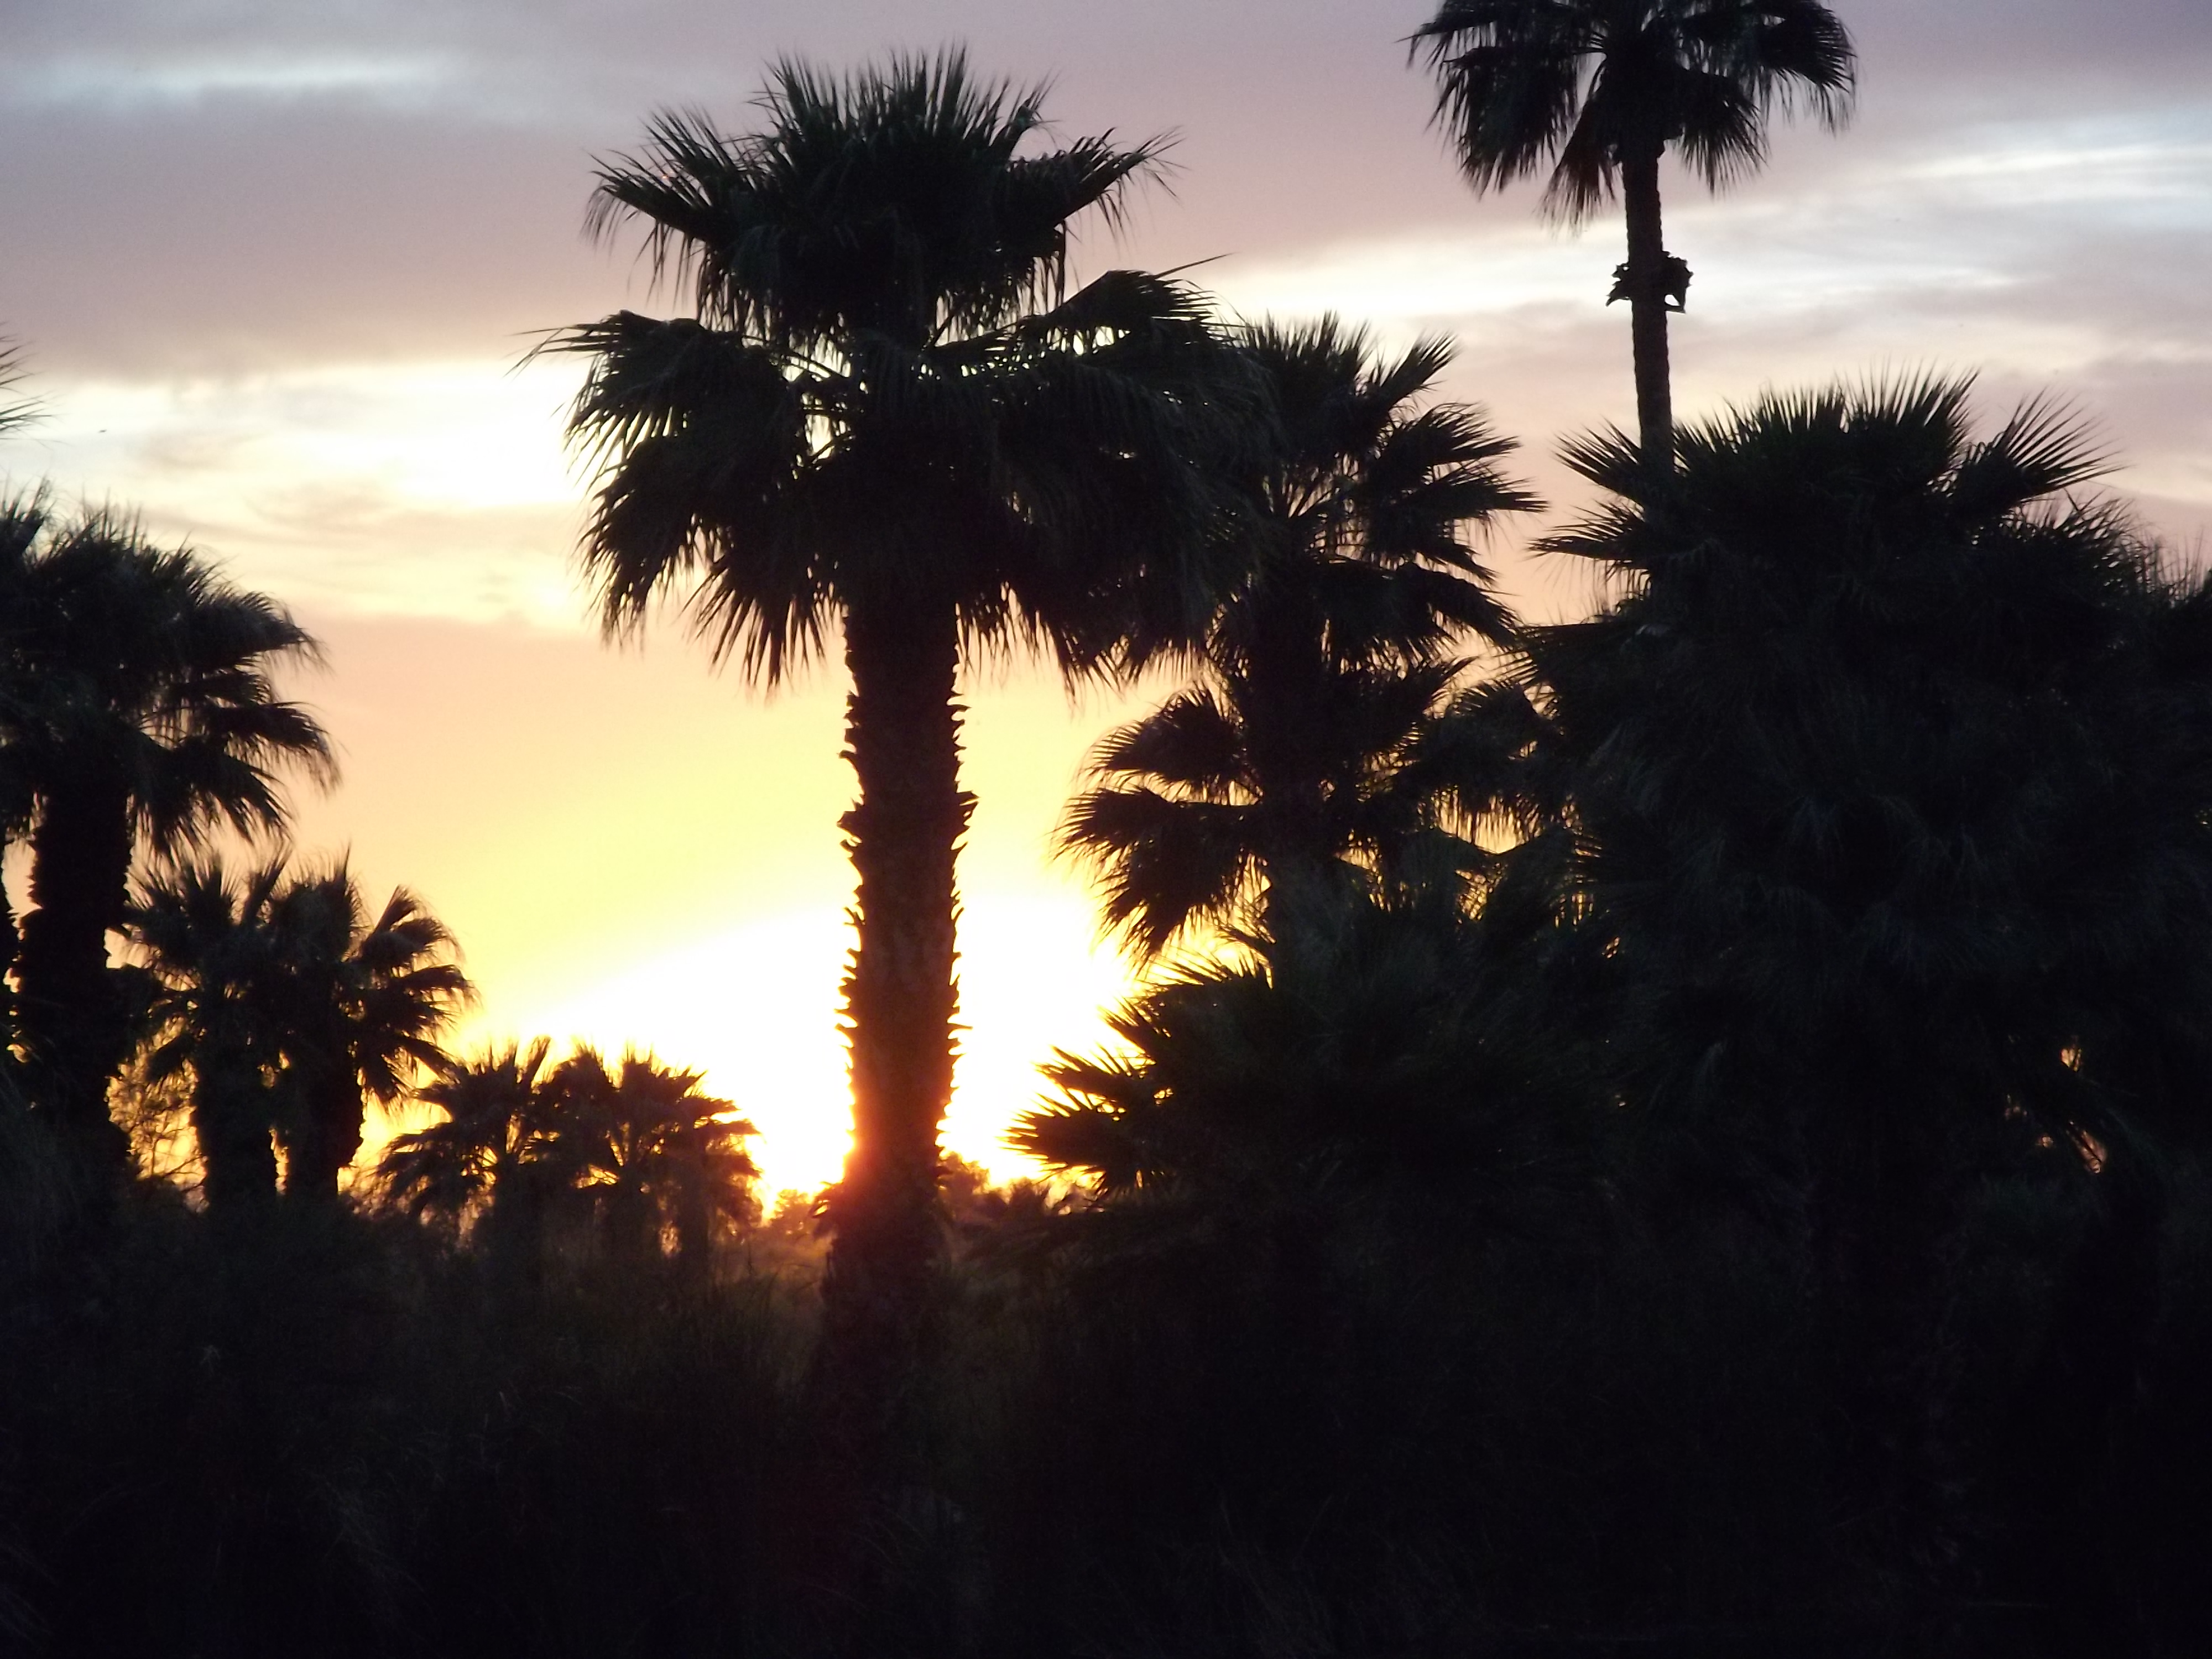 Sunset in the palm trees